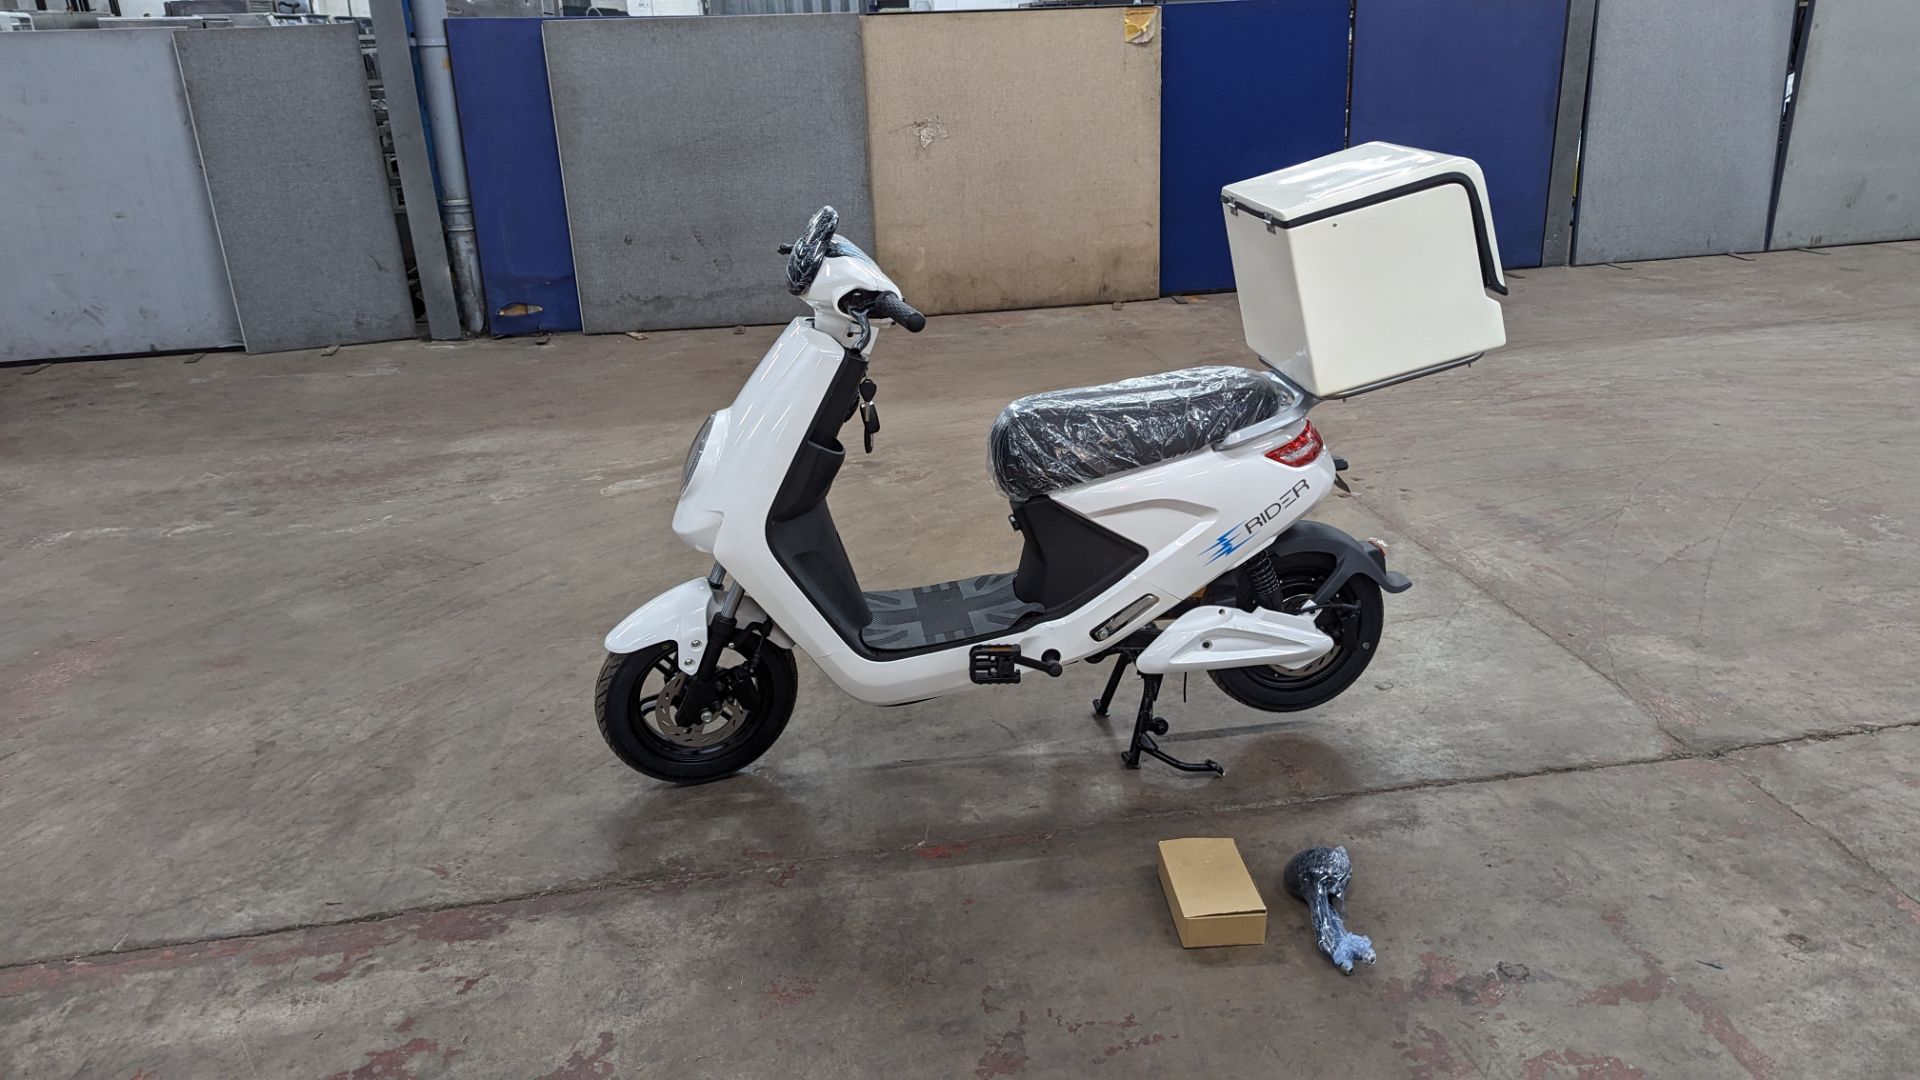 Model 18 Electric Bike: Zero (0) recorded miles, white body with black detailing, insulated box moun - Image 2 of 16